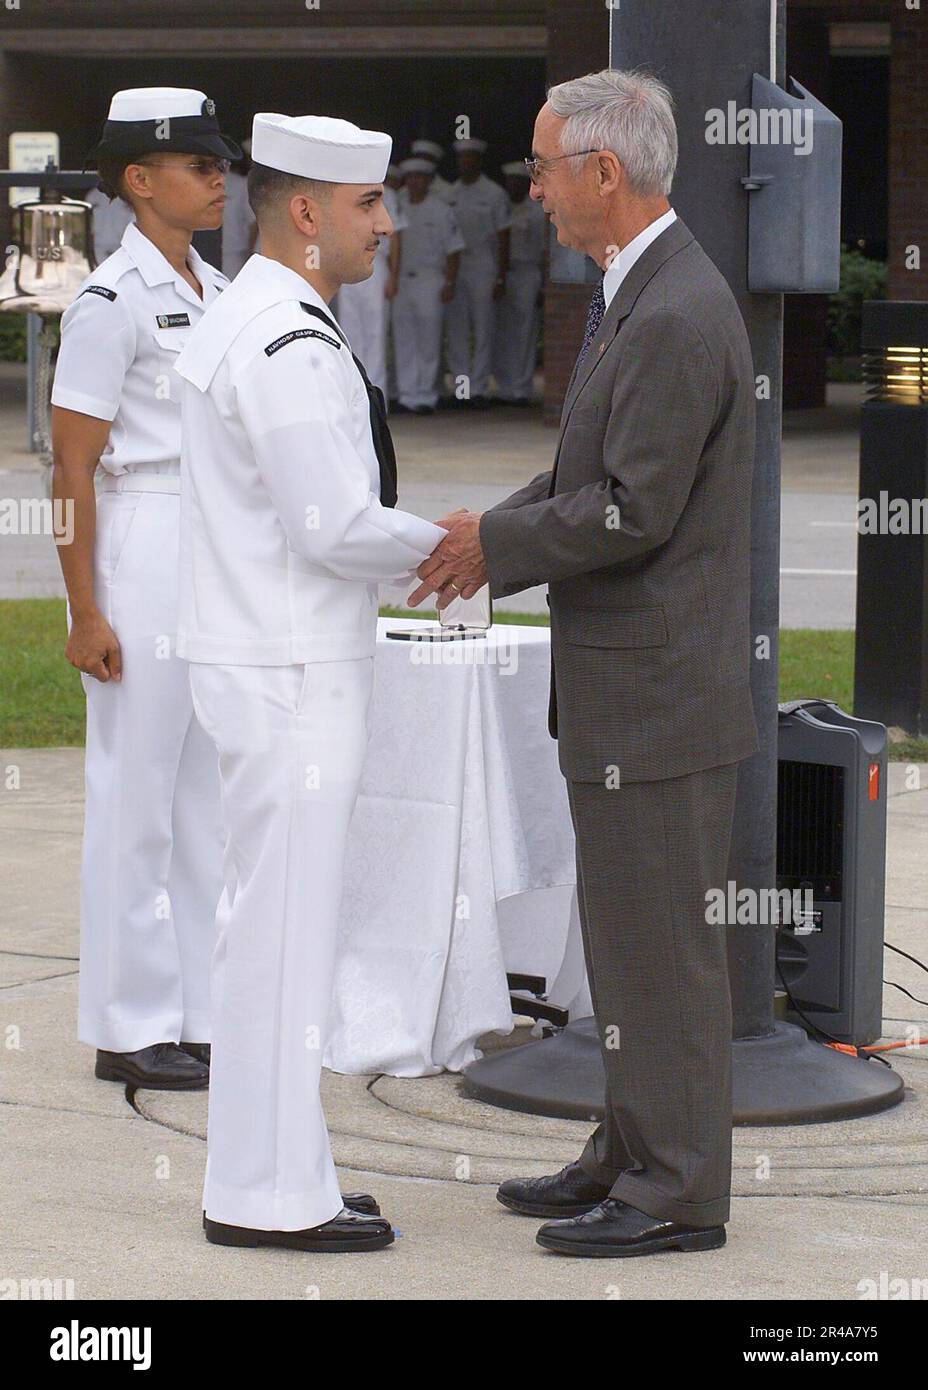 US Navy Secretary of the Navy, Gordon R. England presents the Navy Cross to Hospitalman Apprentice Luis E. Fonseca, Jr., for heroism during the battle of An Nasiriyah, Iraq, in March 2003 Stock Photo